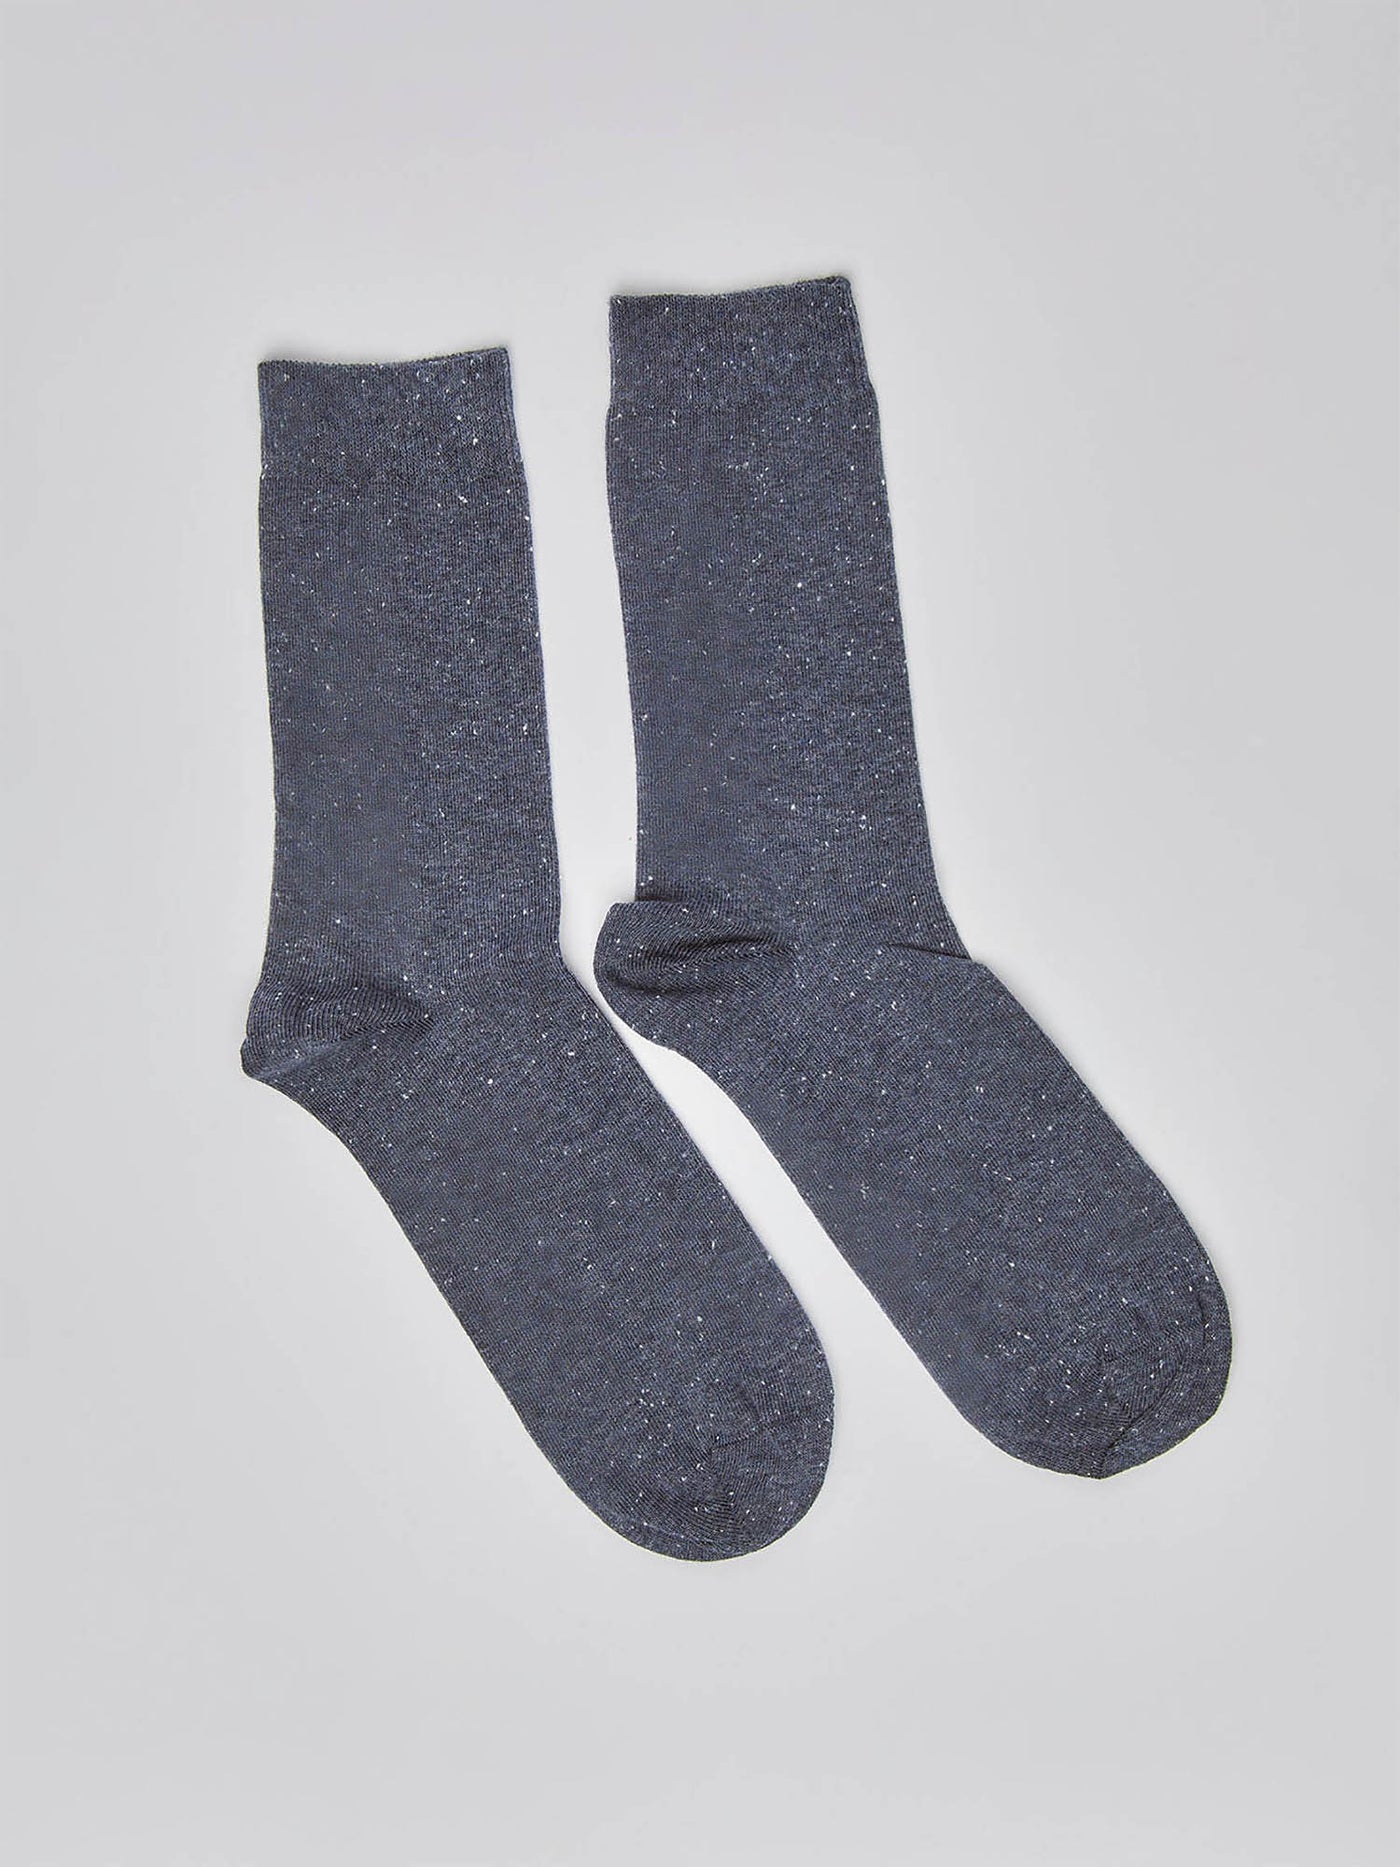 3 Pairs of Socks - Solid - Long